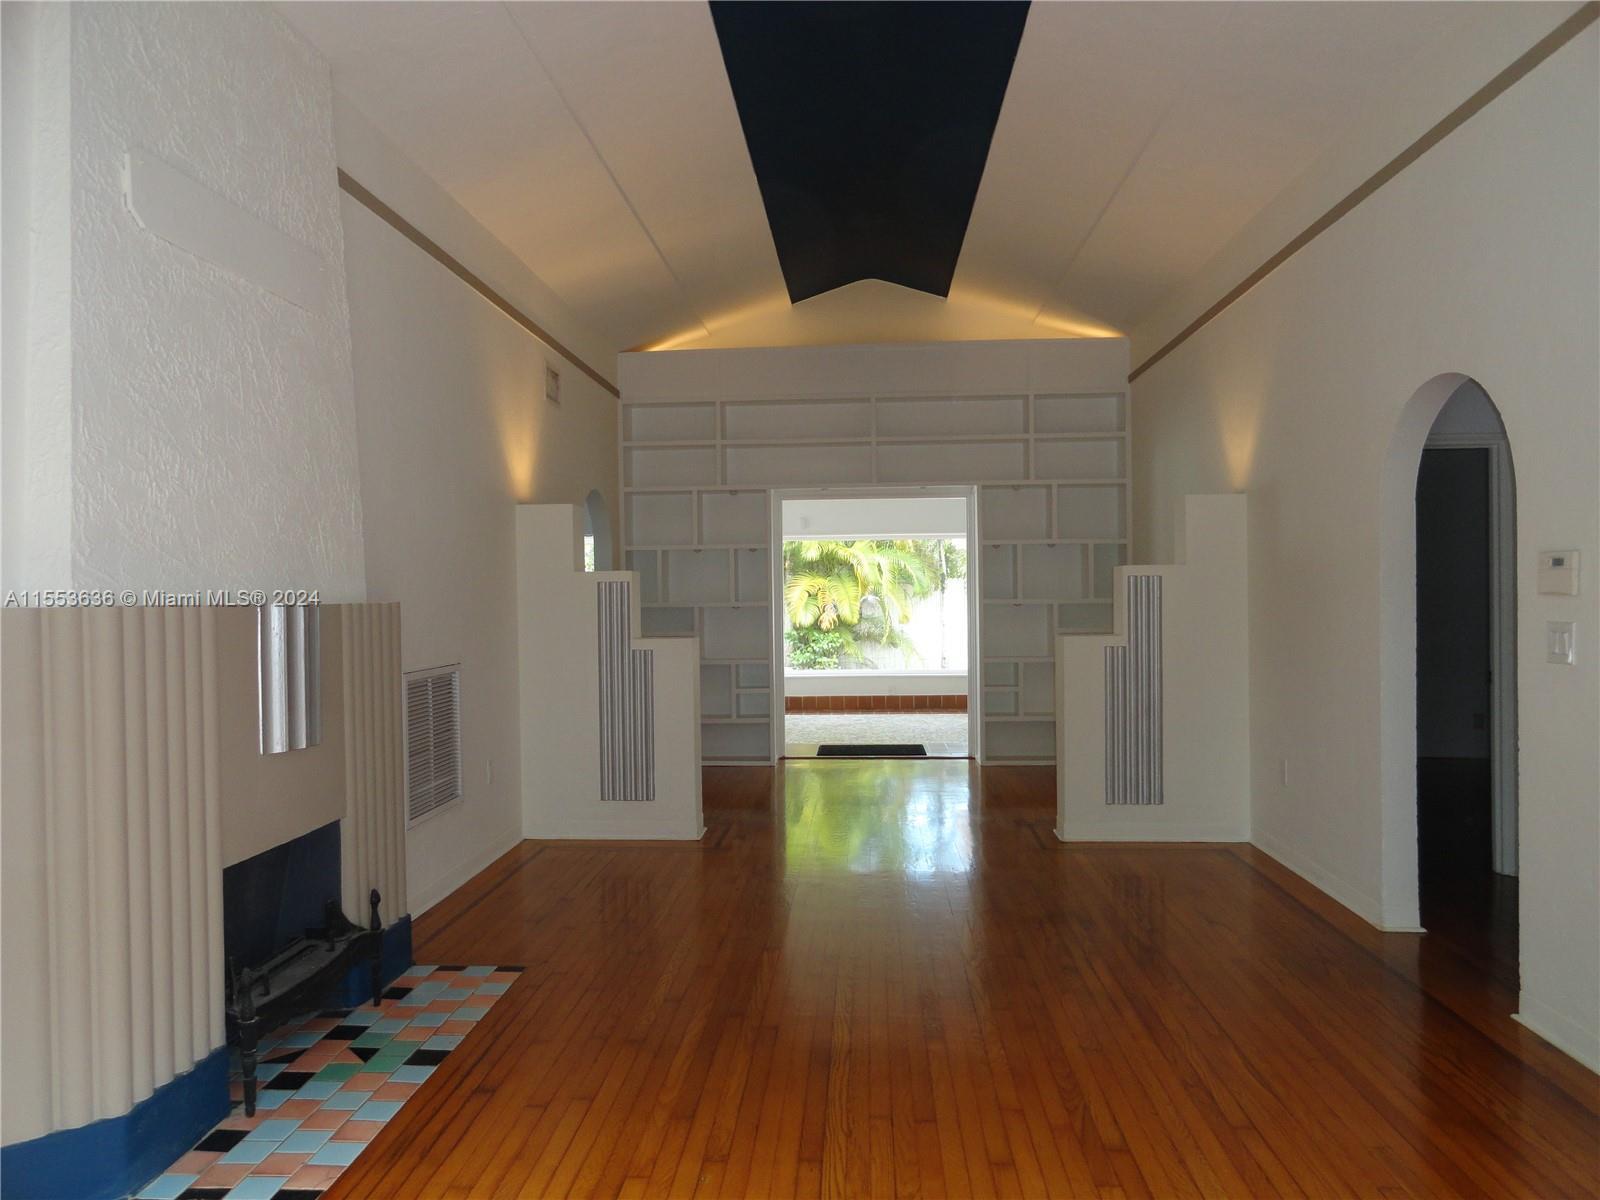 DESIGN DISTRICT RESIDENCE !  DREAM LOCATION - THIS HOME IS SITUATED ON A VERY CHARMING AND QUIET LOW